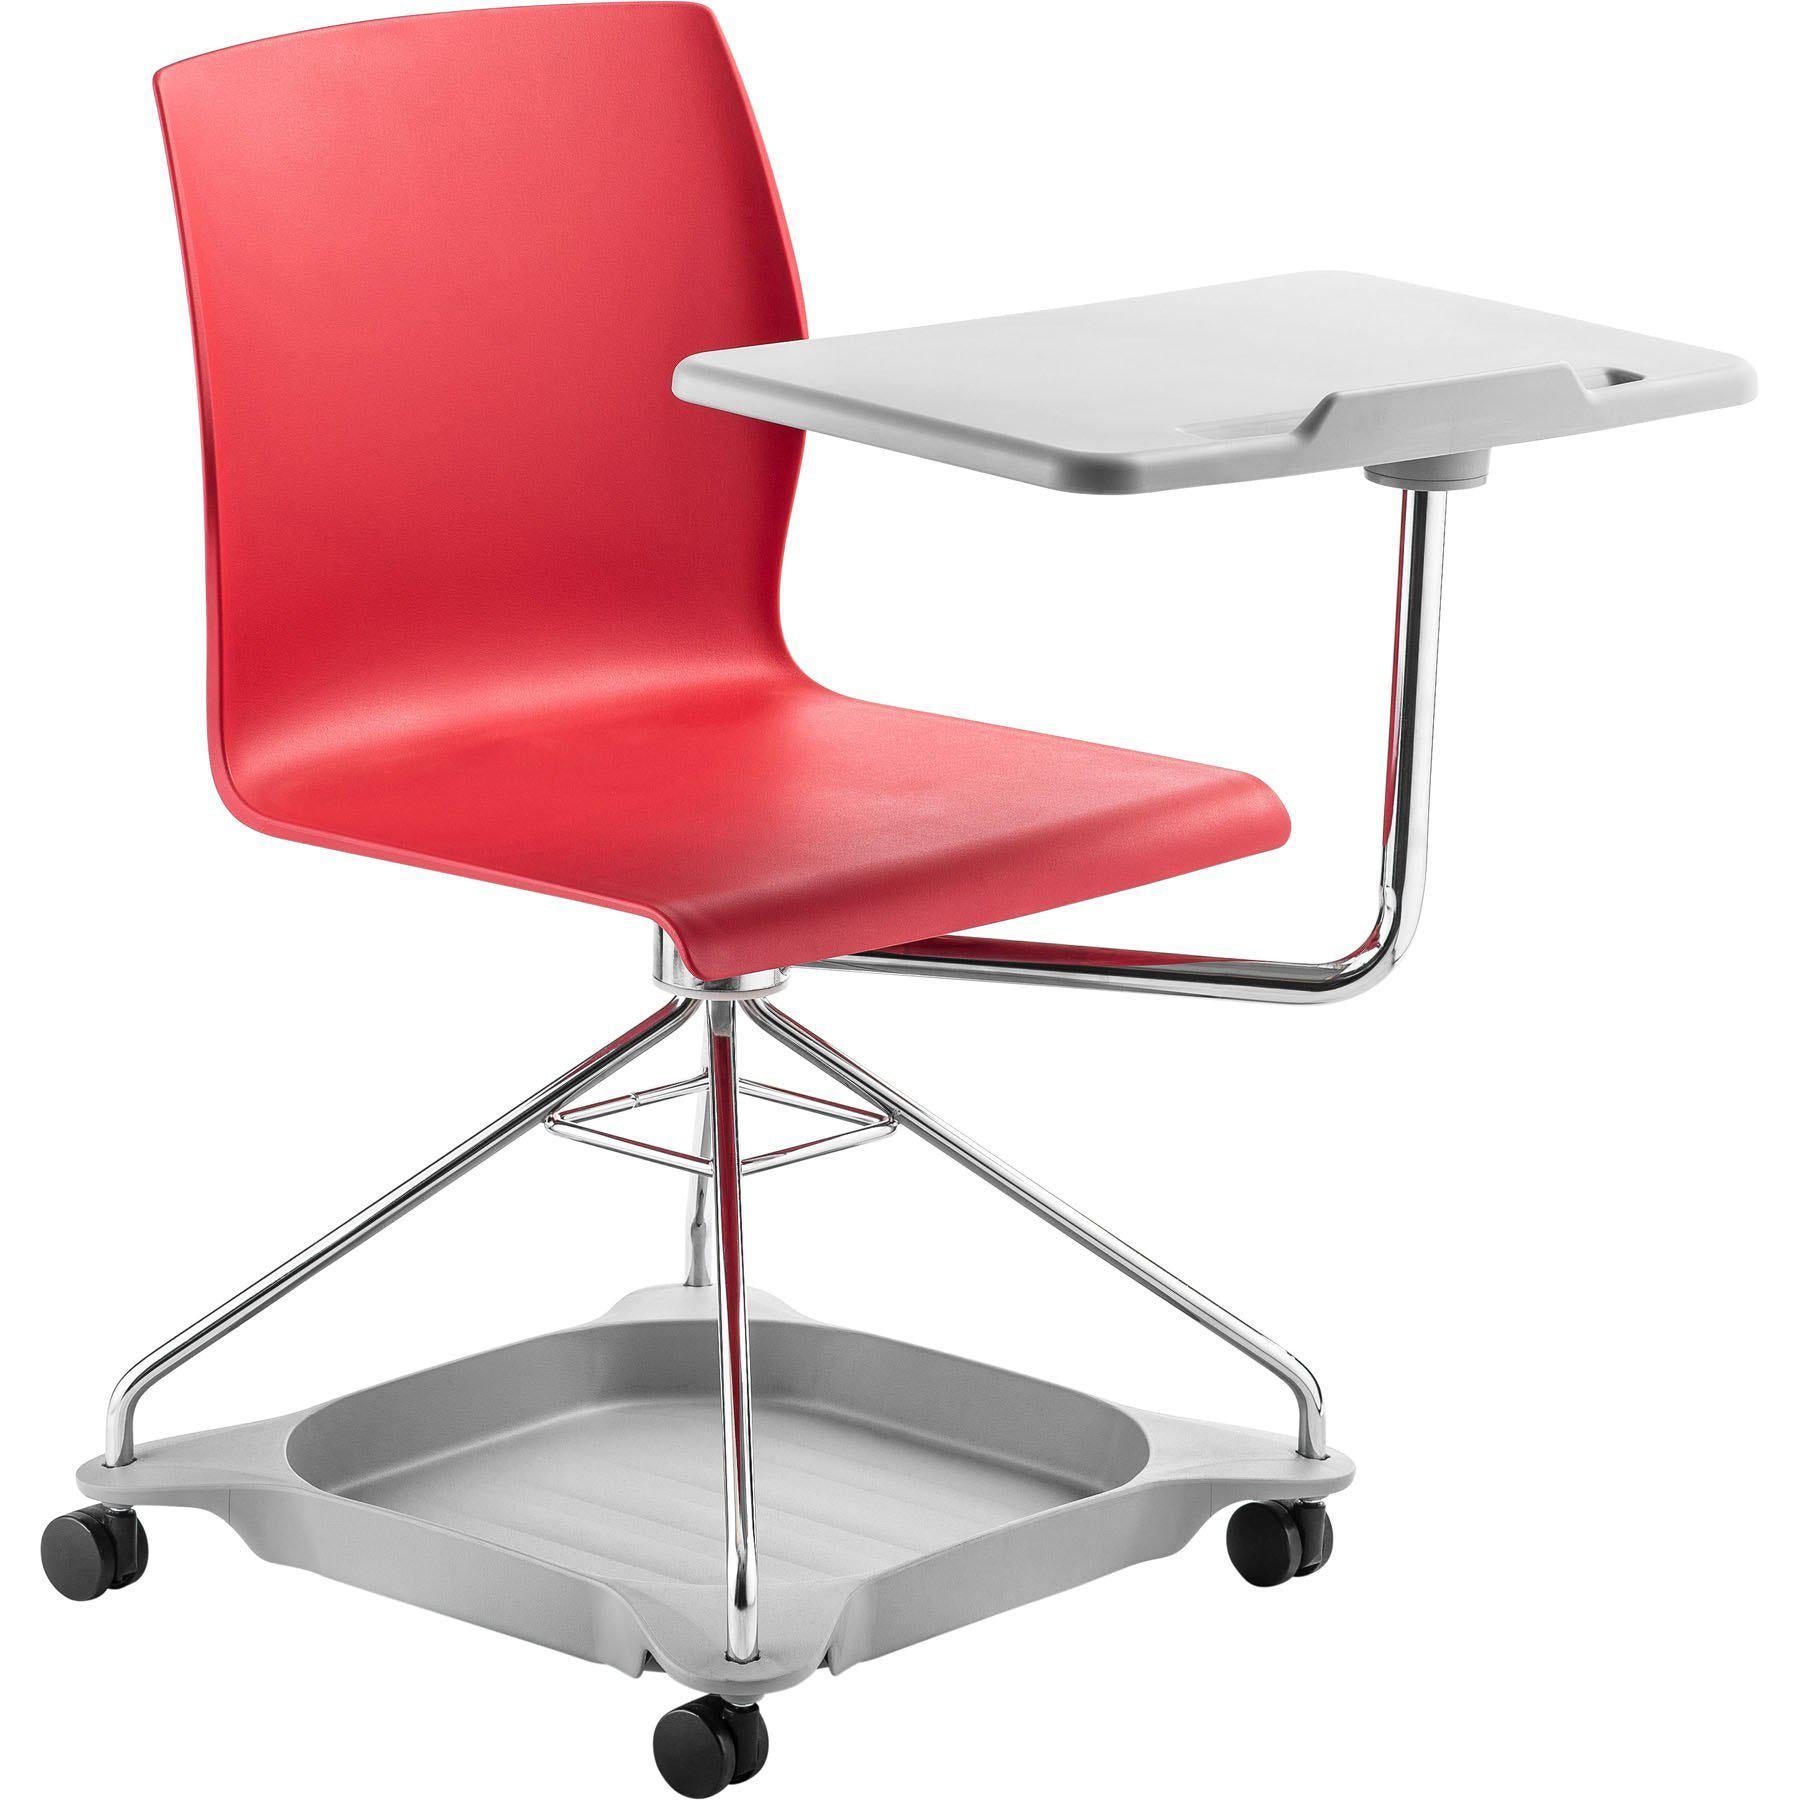 CoGo Chair on the Go Mobile Tablet Chair-Chairs-Red with Grey Base & Tablet-